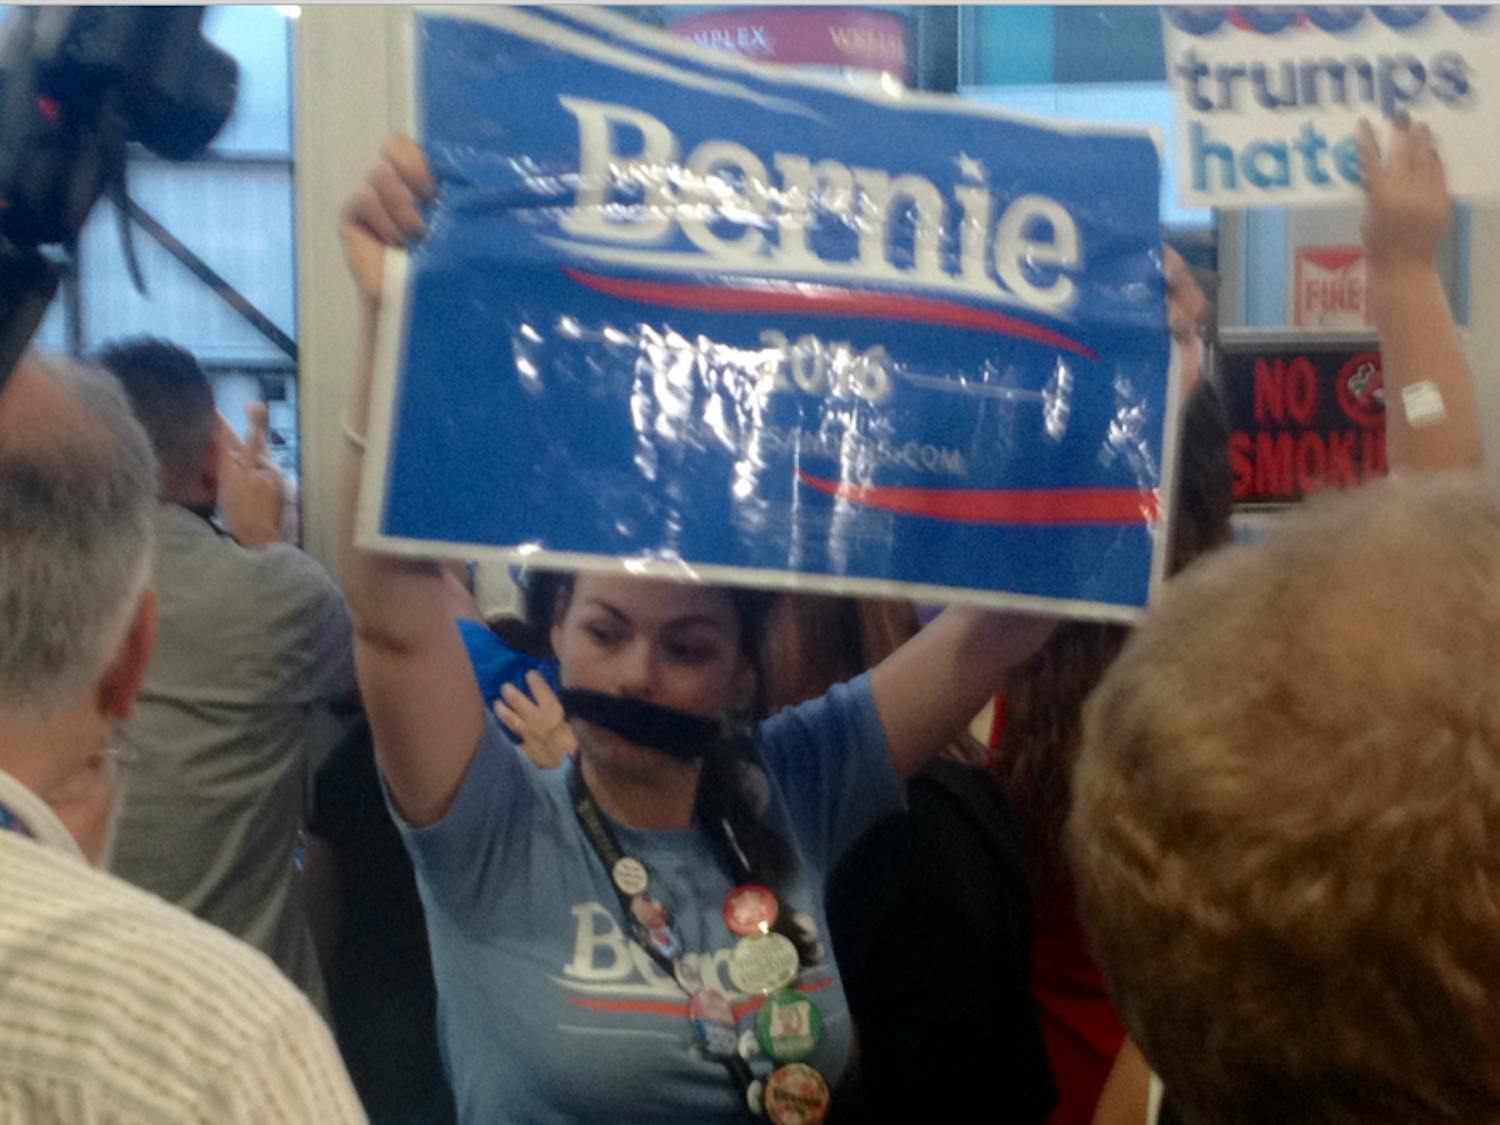 A Bernie Sanders delegate protests inside the media center at the Democratic National Convention in Philadelphia on July 26, 2016.